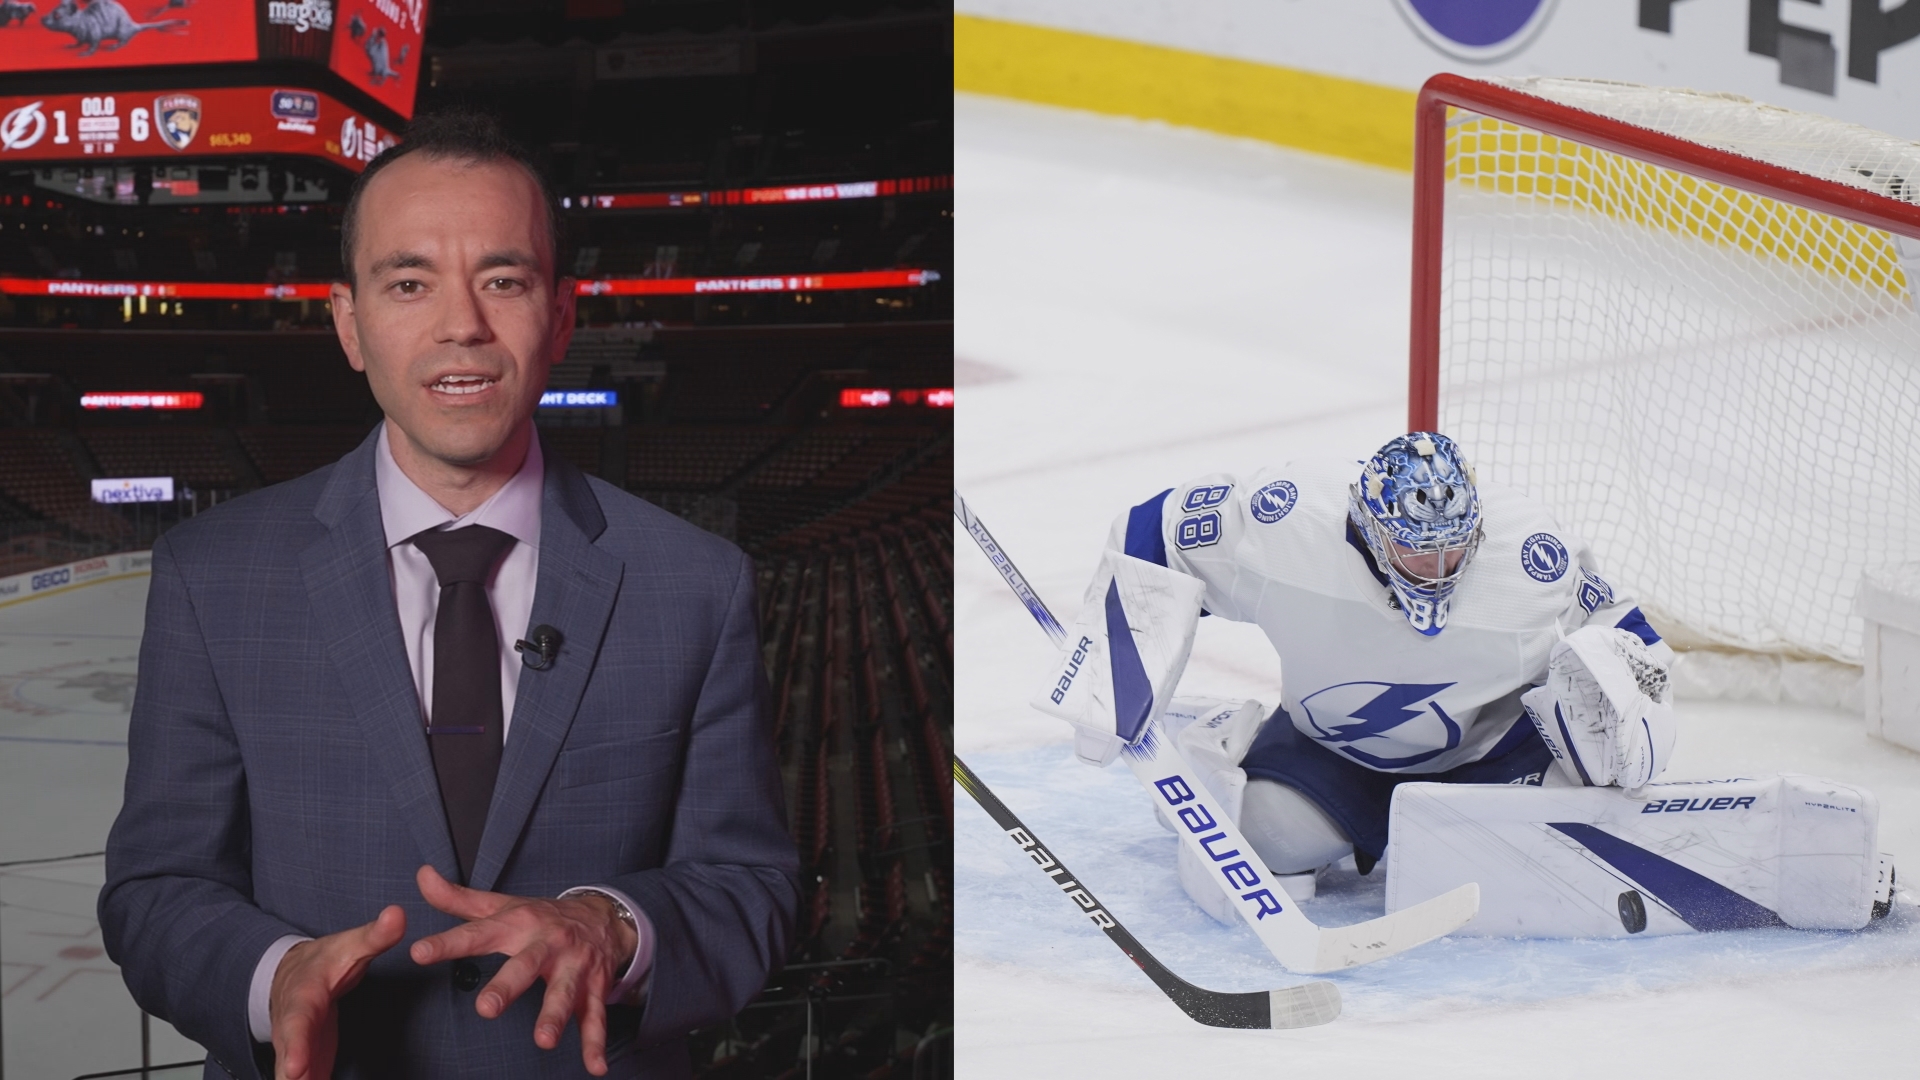 For the second year straight, the Tampa Bay Lightning are bounced from the playoffs in the first round. 10 Tampa Bay Sports Director Evan Closky was at the game.